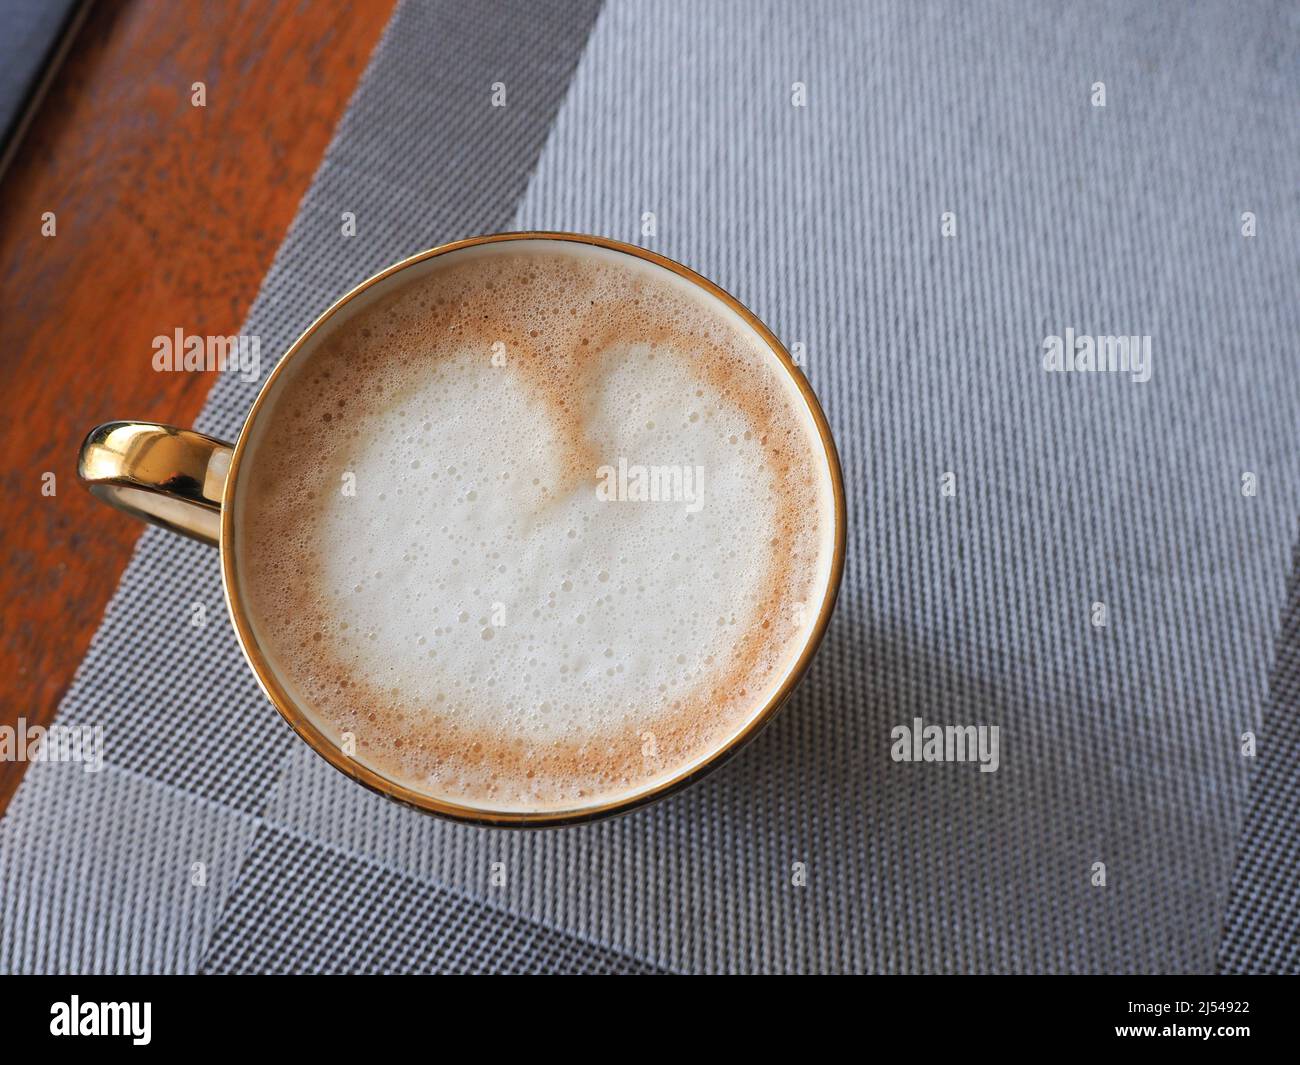 Close-up of a mug of coffee seen from above showing latte art in the shape of a heart Stock Photo